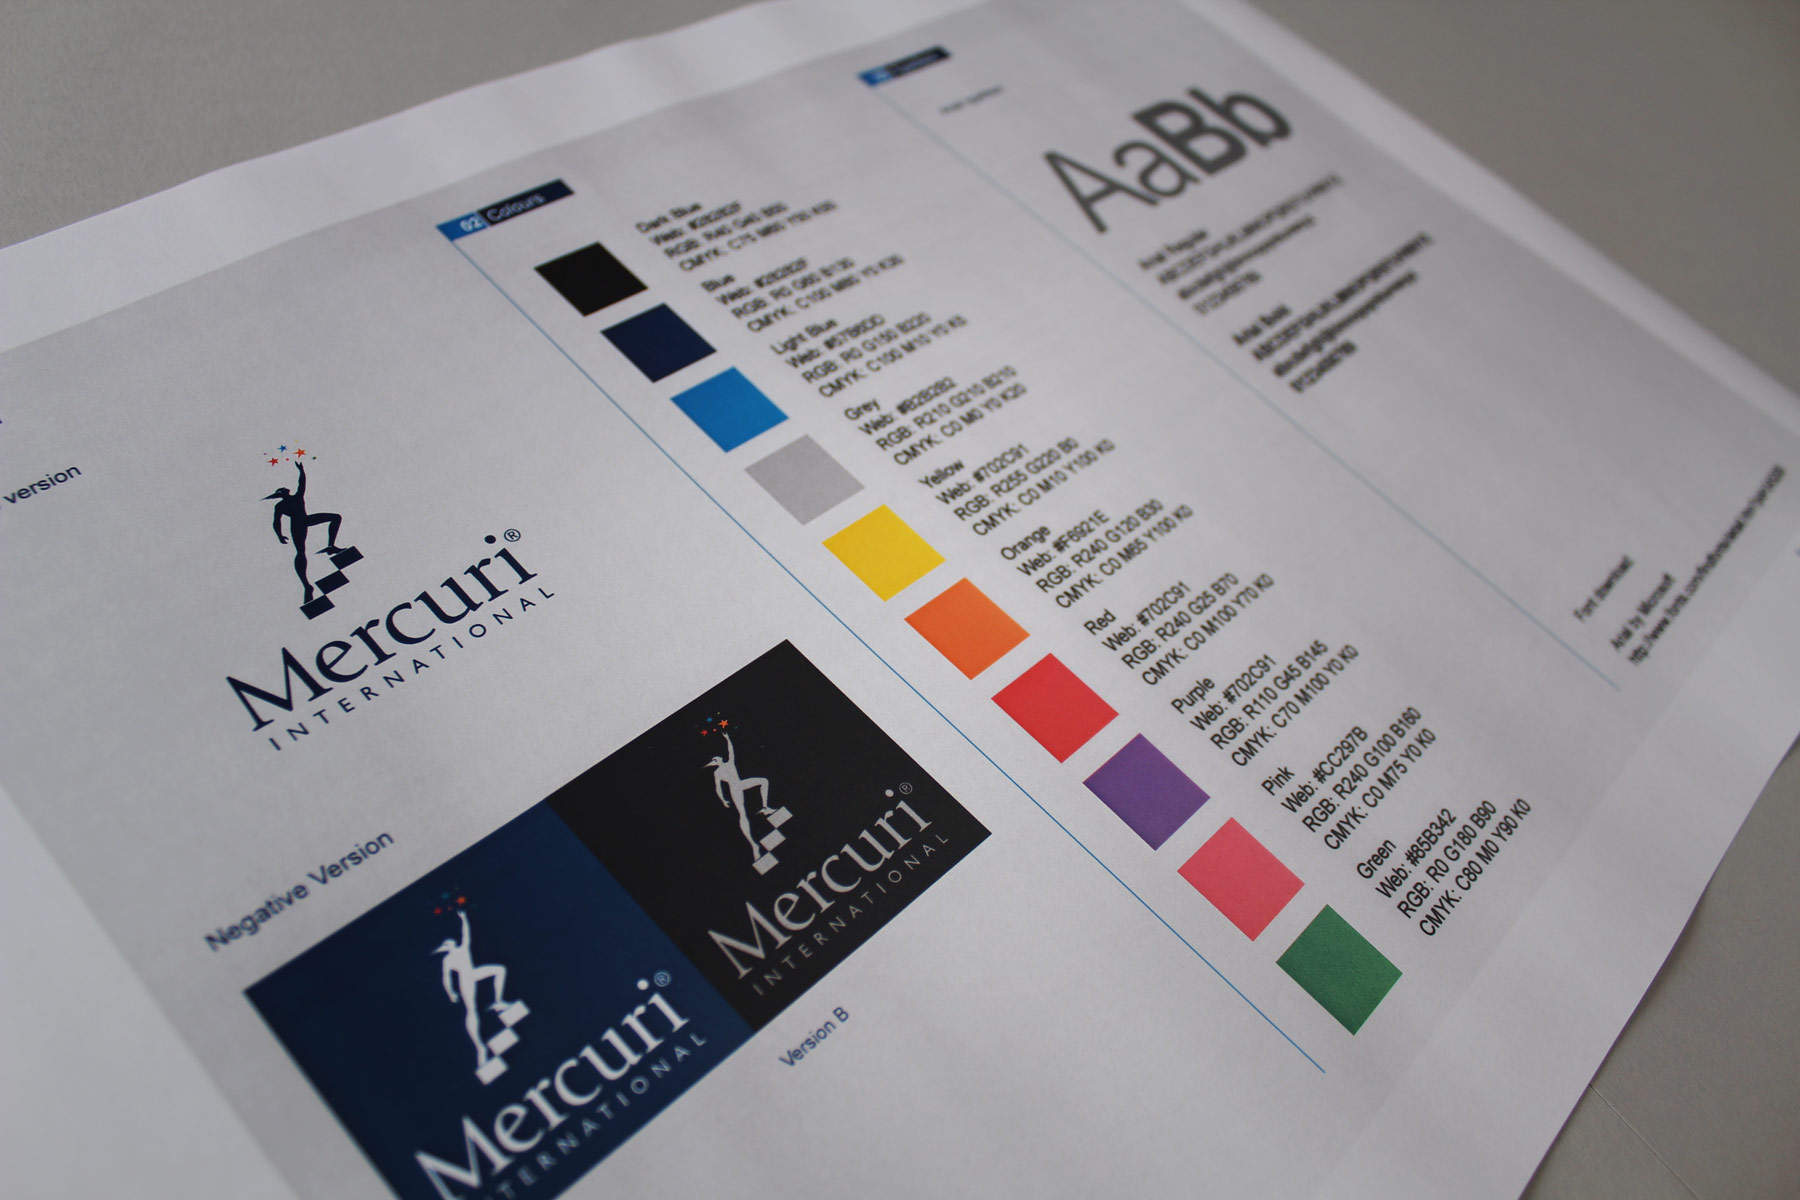 We worked with the Mercuri guidelines and extended the controls into the digital format.